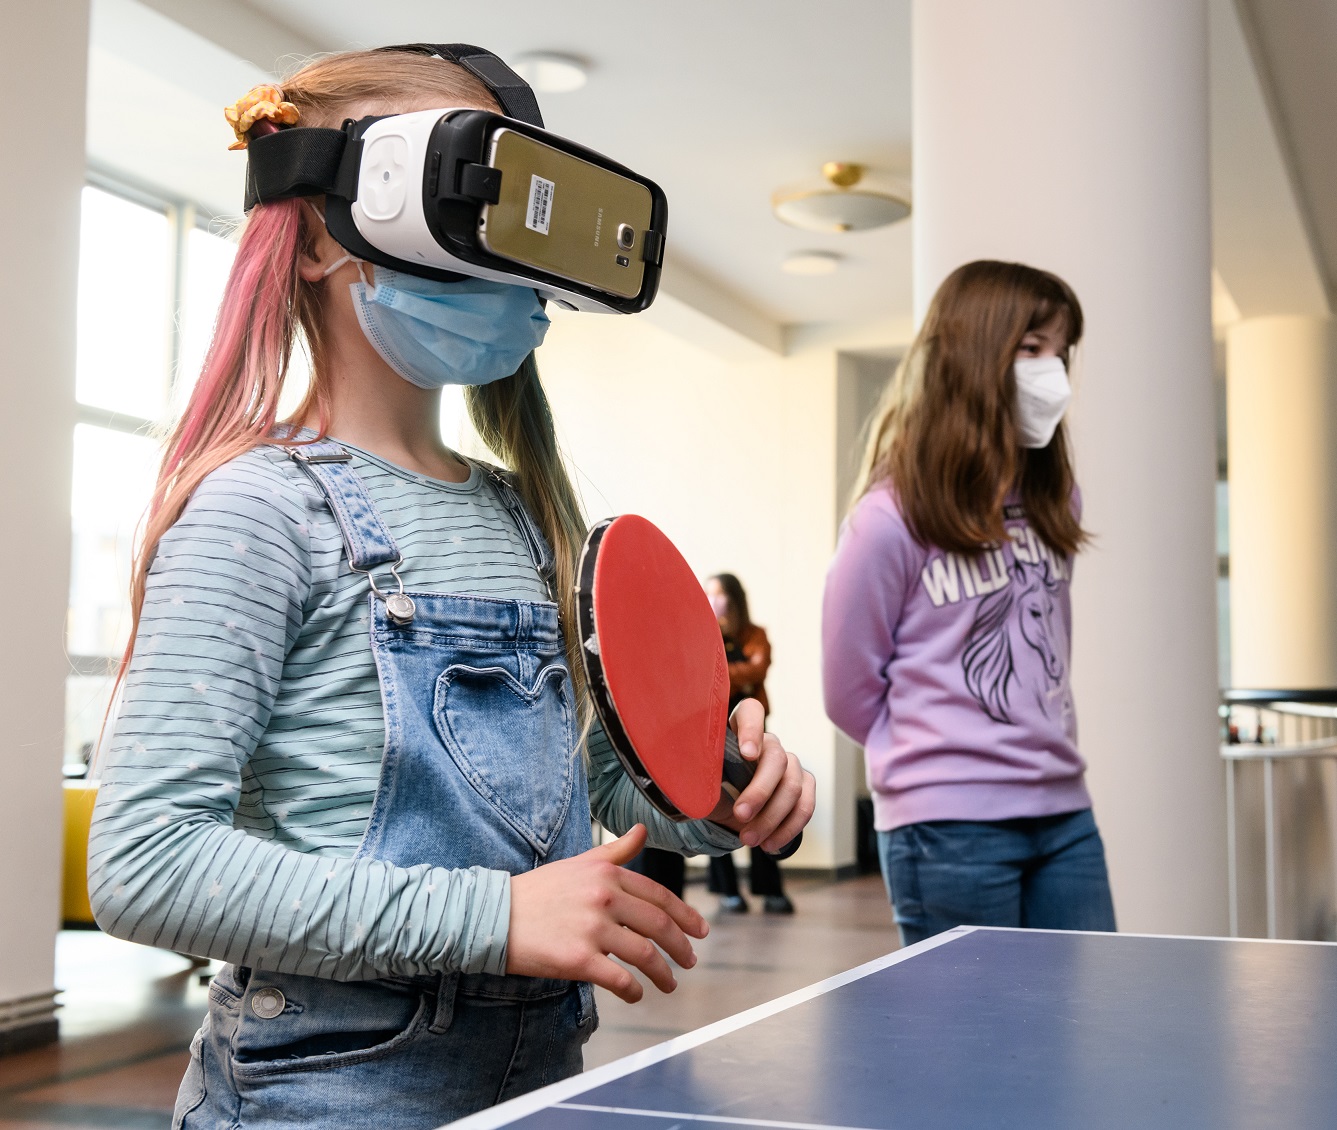 Photograph of a little girl wearing a virtual reality visor while playing table tennis